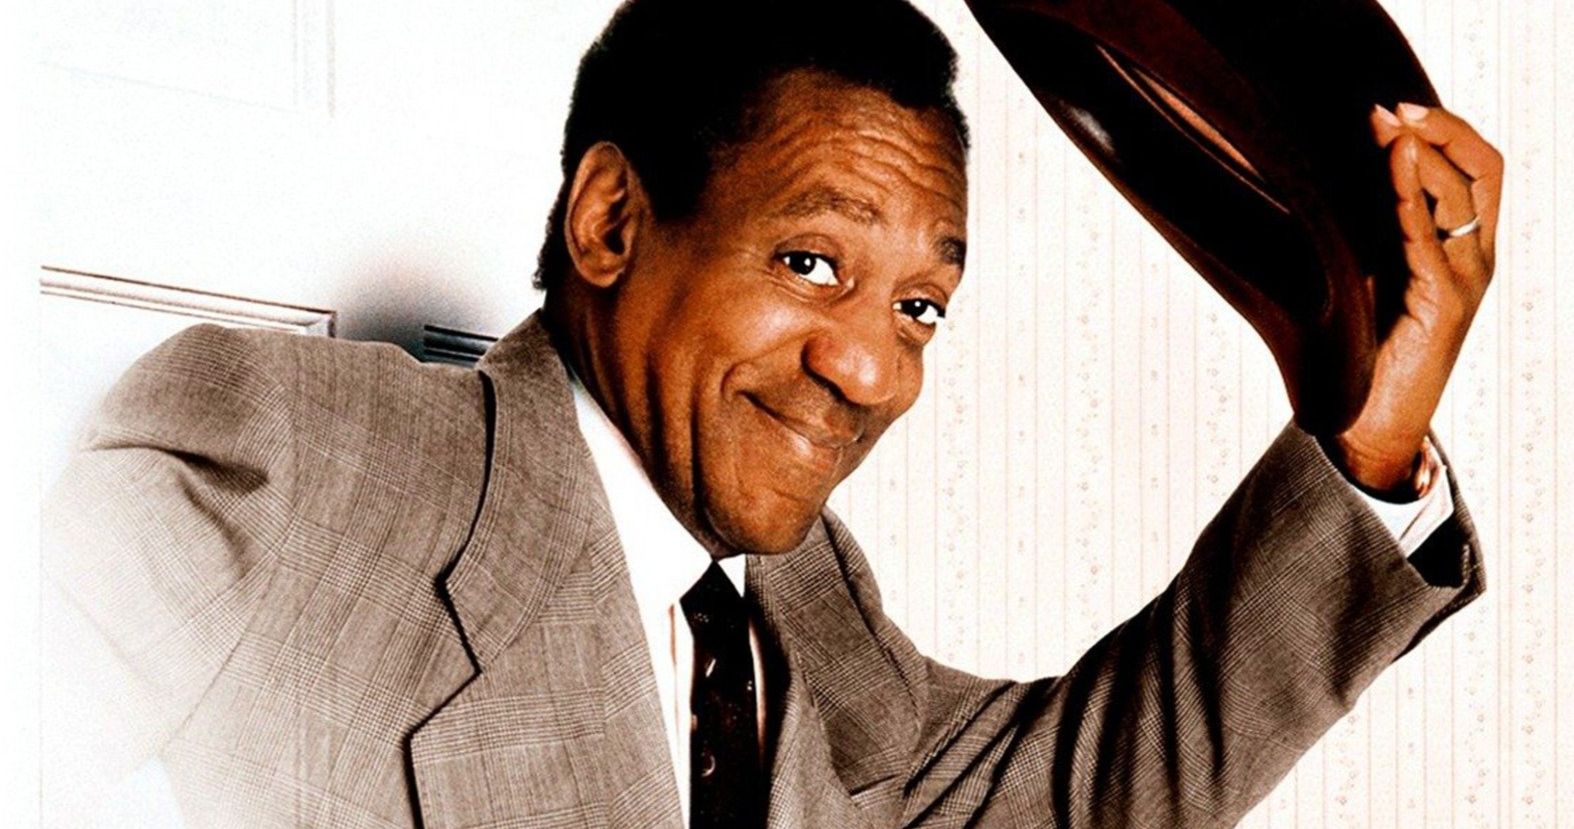 Bill Cosby Speaks Out Against His Critics: There's a Big Smile on My Face